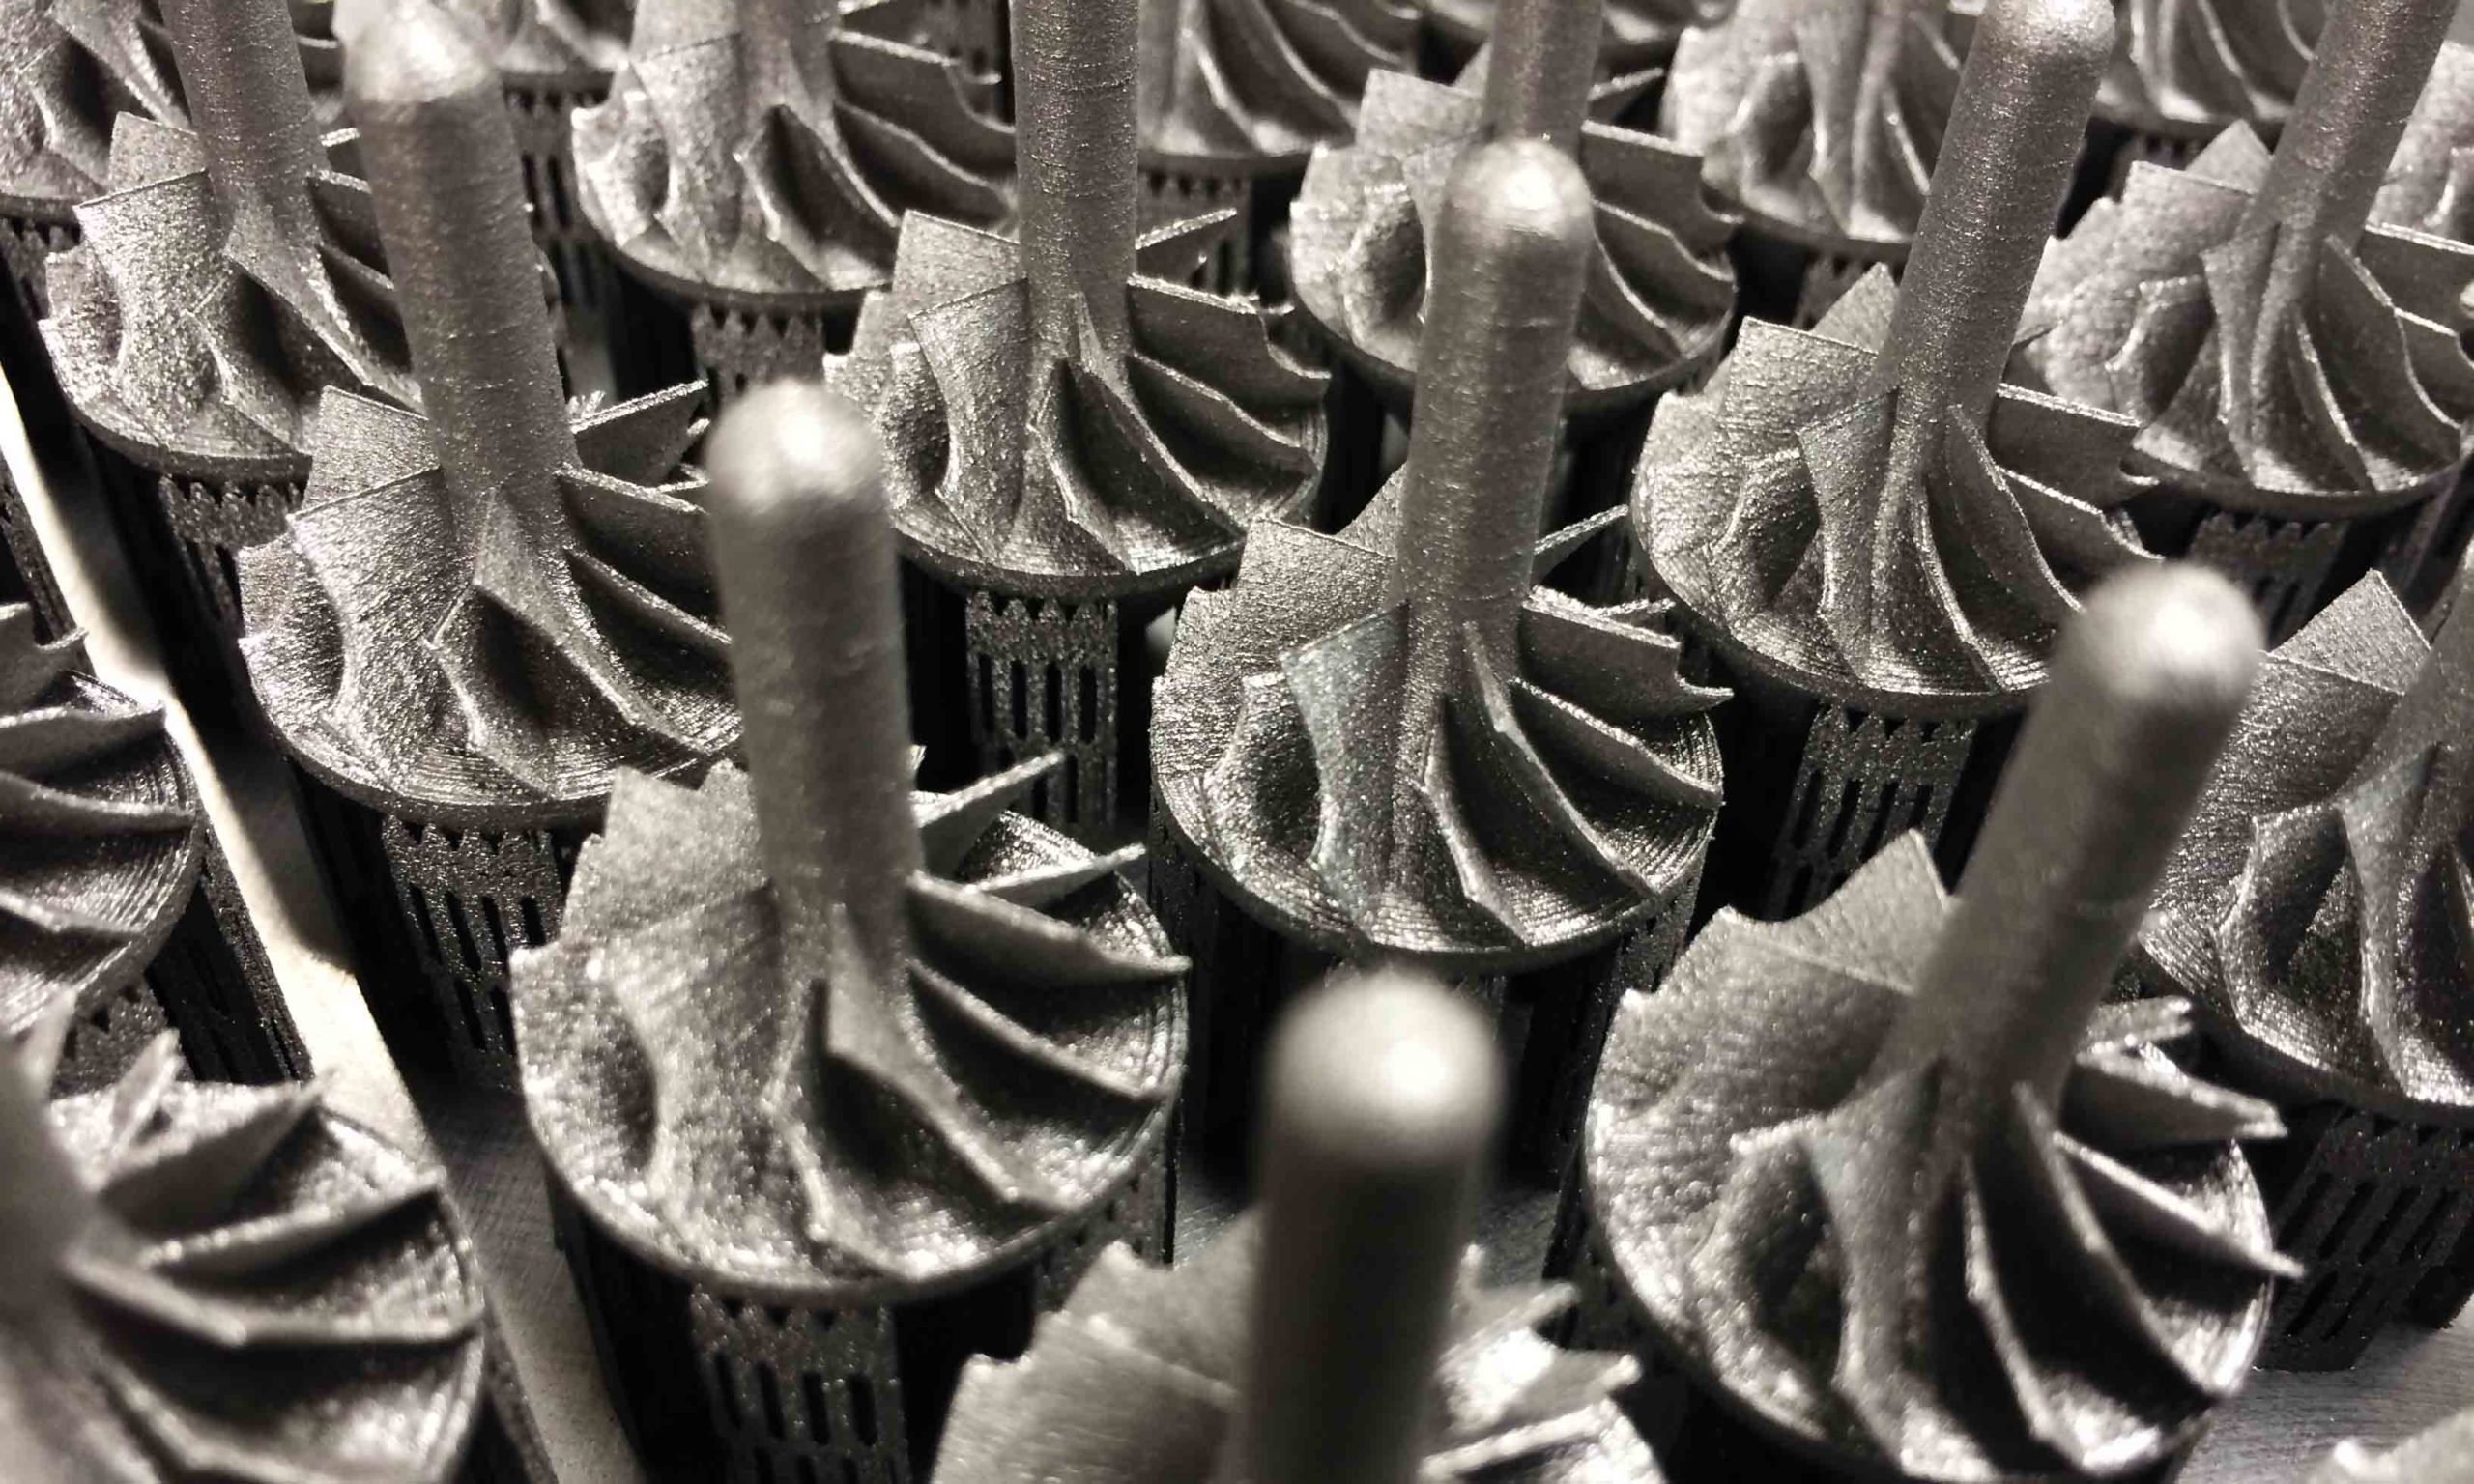 How to Get a Better Surface Finish in Direct Metal 3D Printing